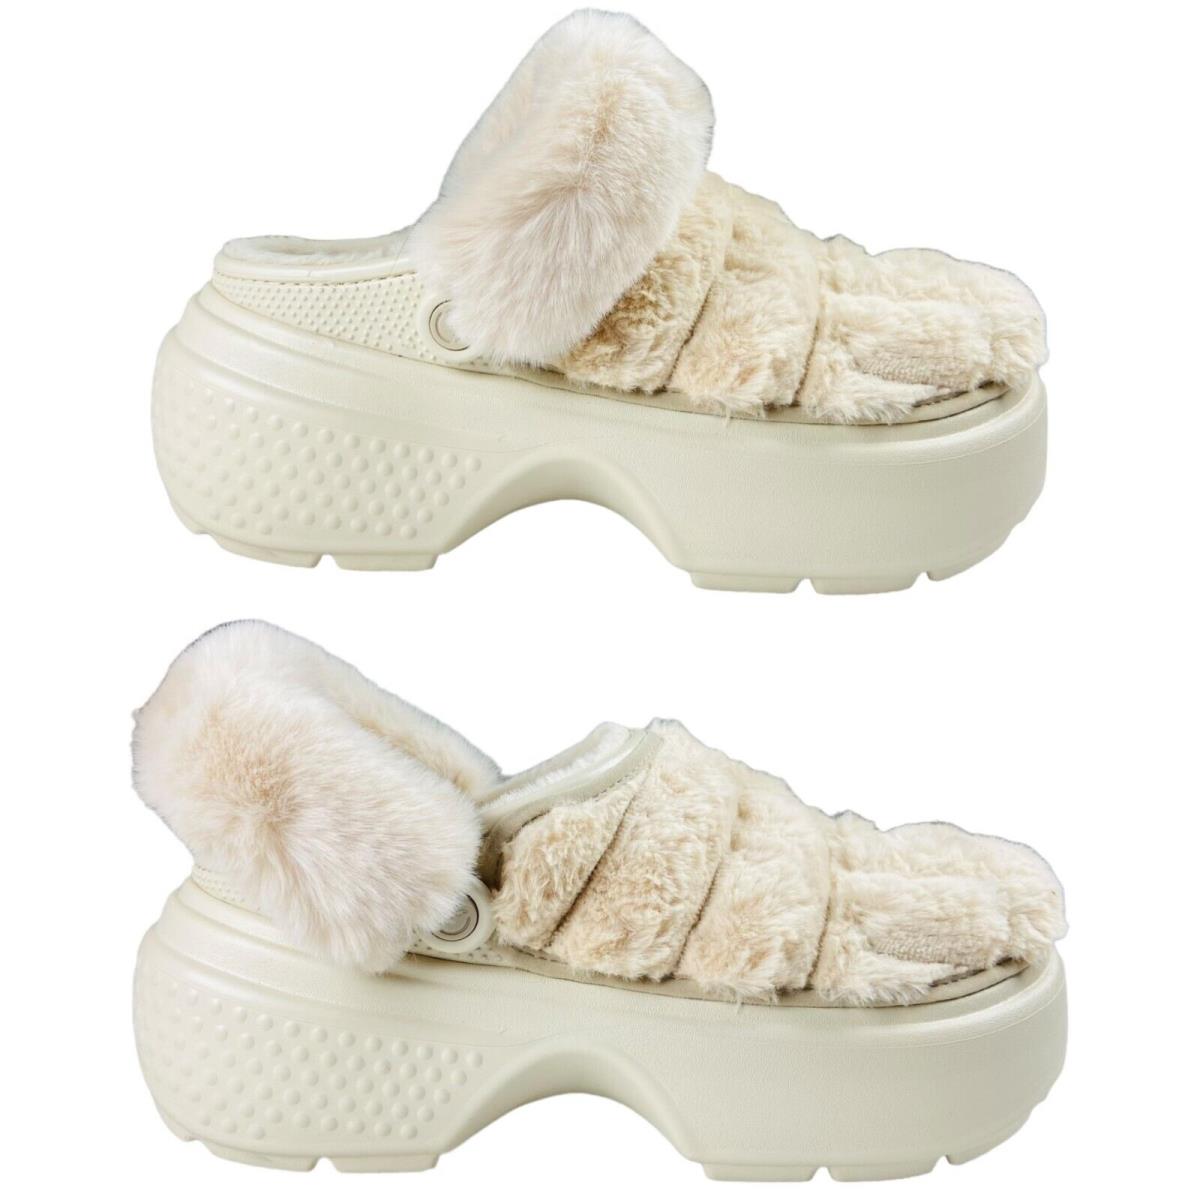 Crocs Unisex Stomp Lined Quilted Clogs Stucco 208938-160 Size M10/W12 - Beige